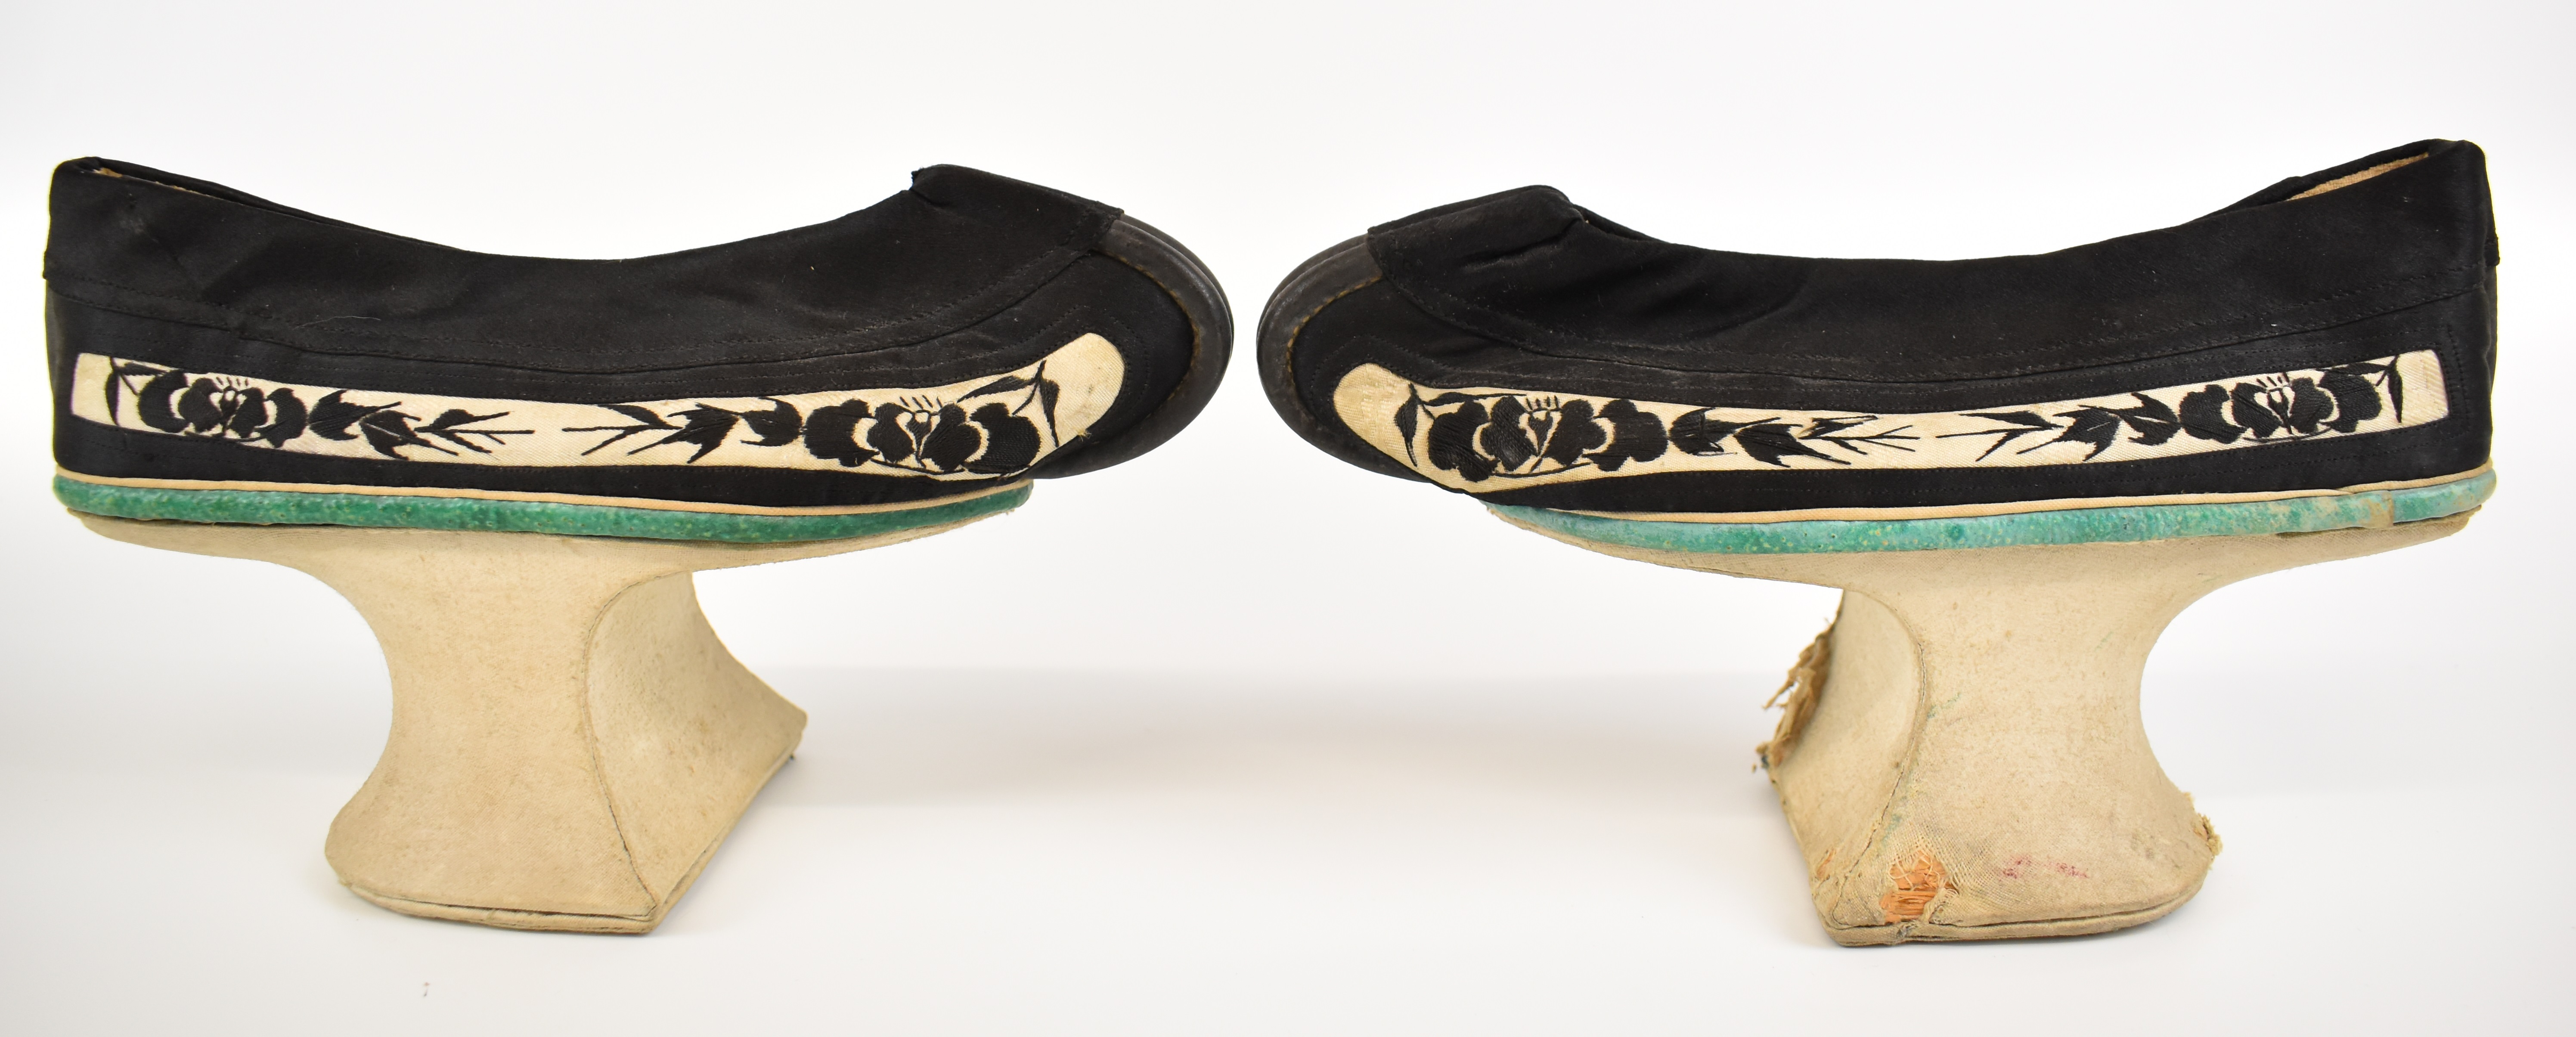 Pair of 19thC Chinese embroidered platform shoes, height 31 x length 21cm - Image 4 of 7